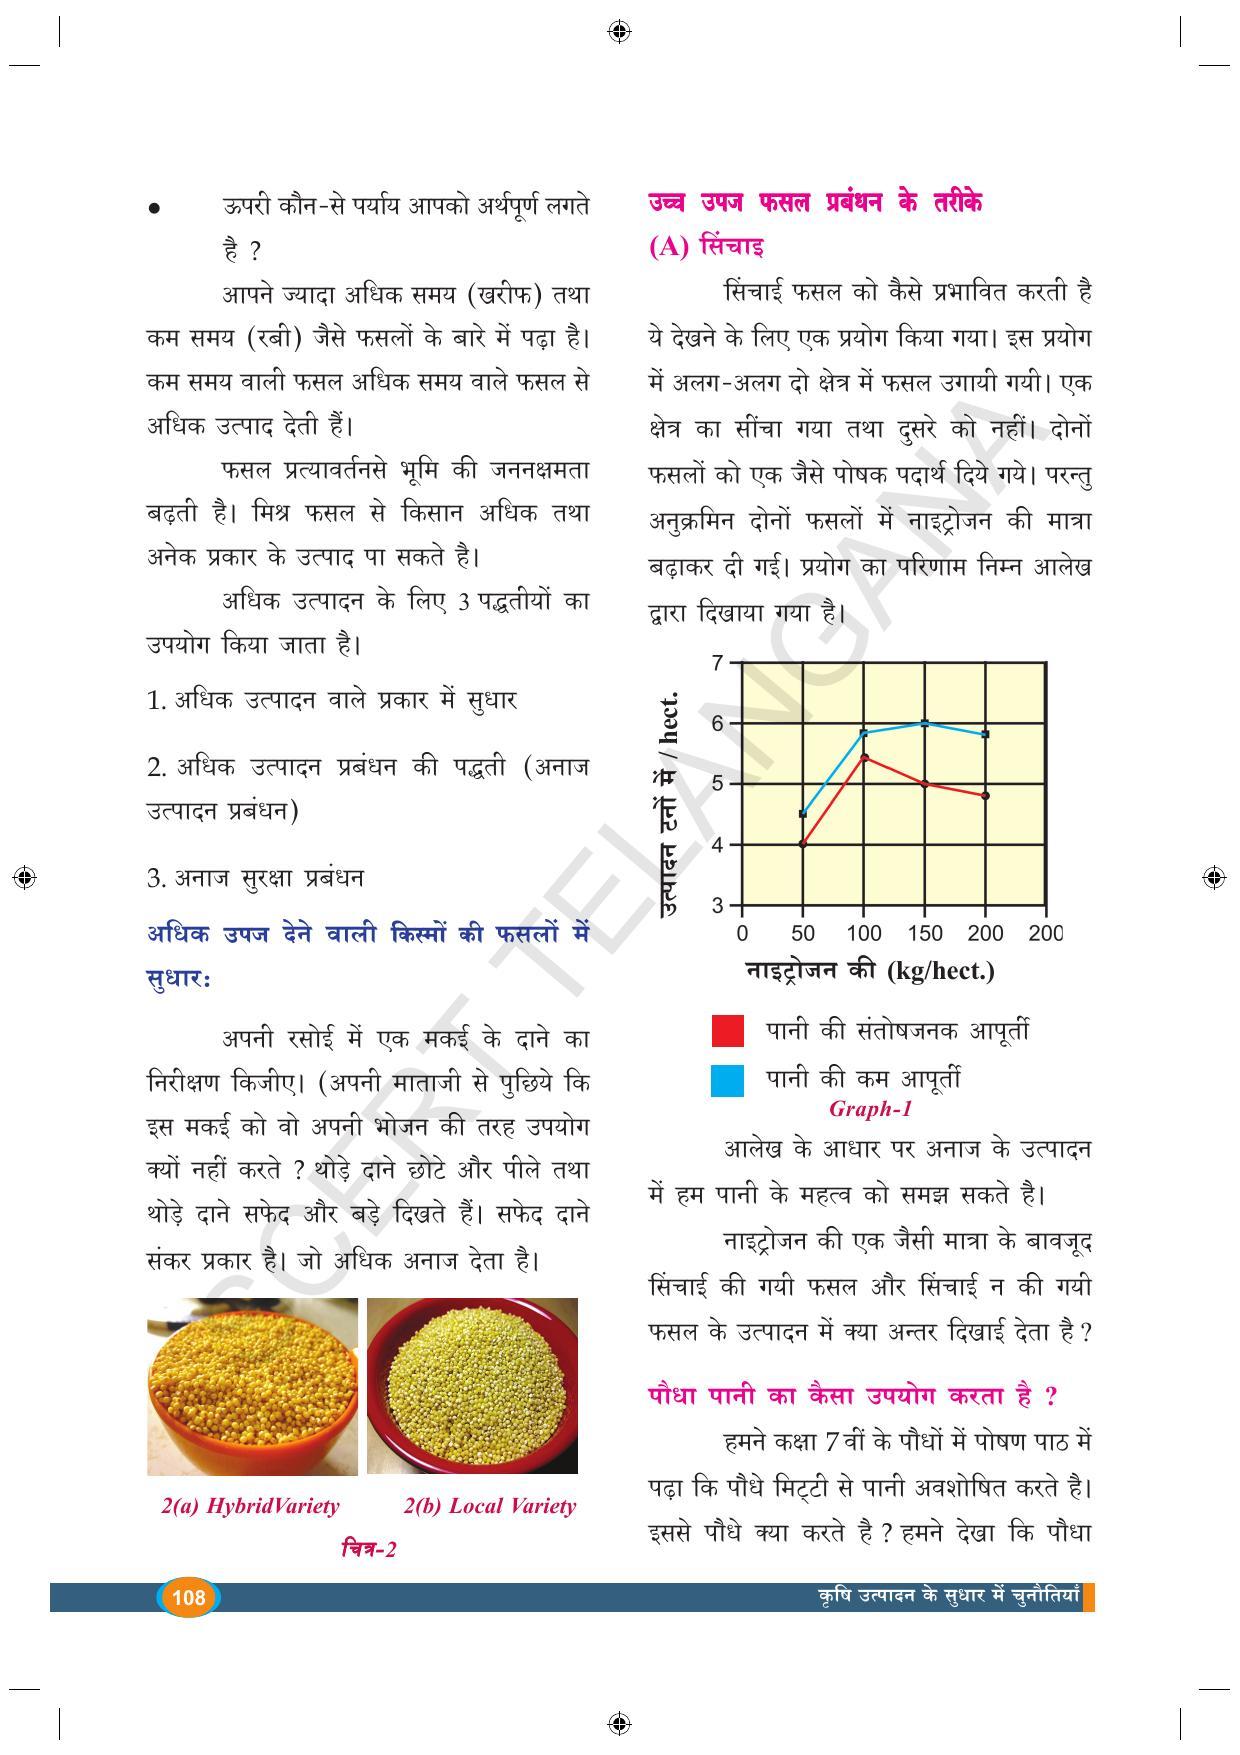 TS SCERT Class 9 Biological Science (Hindi Medium) Text Book - Page 120